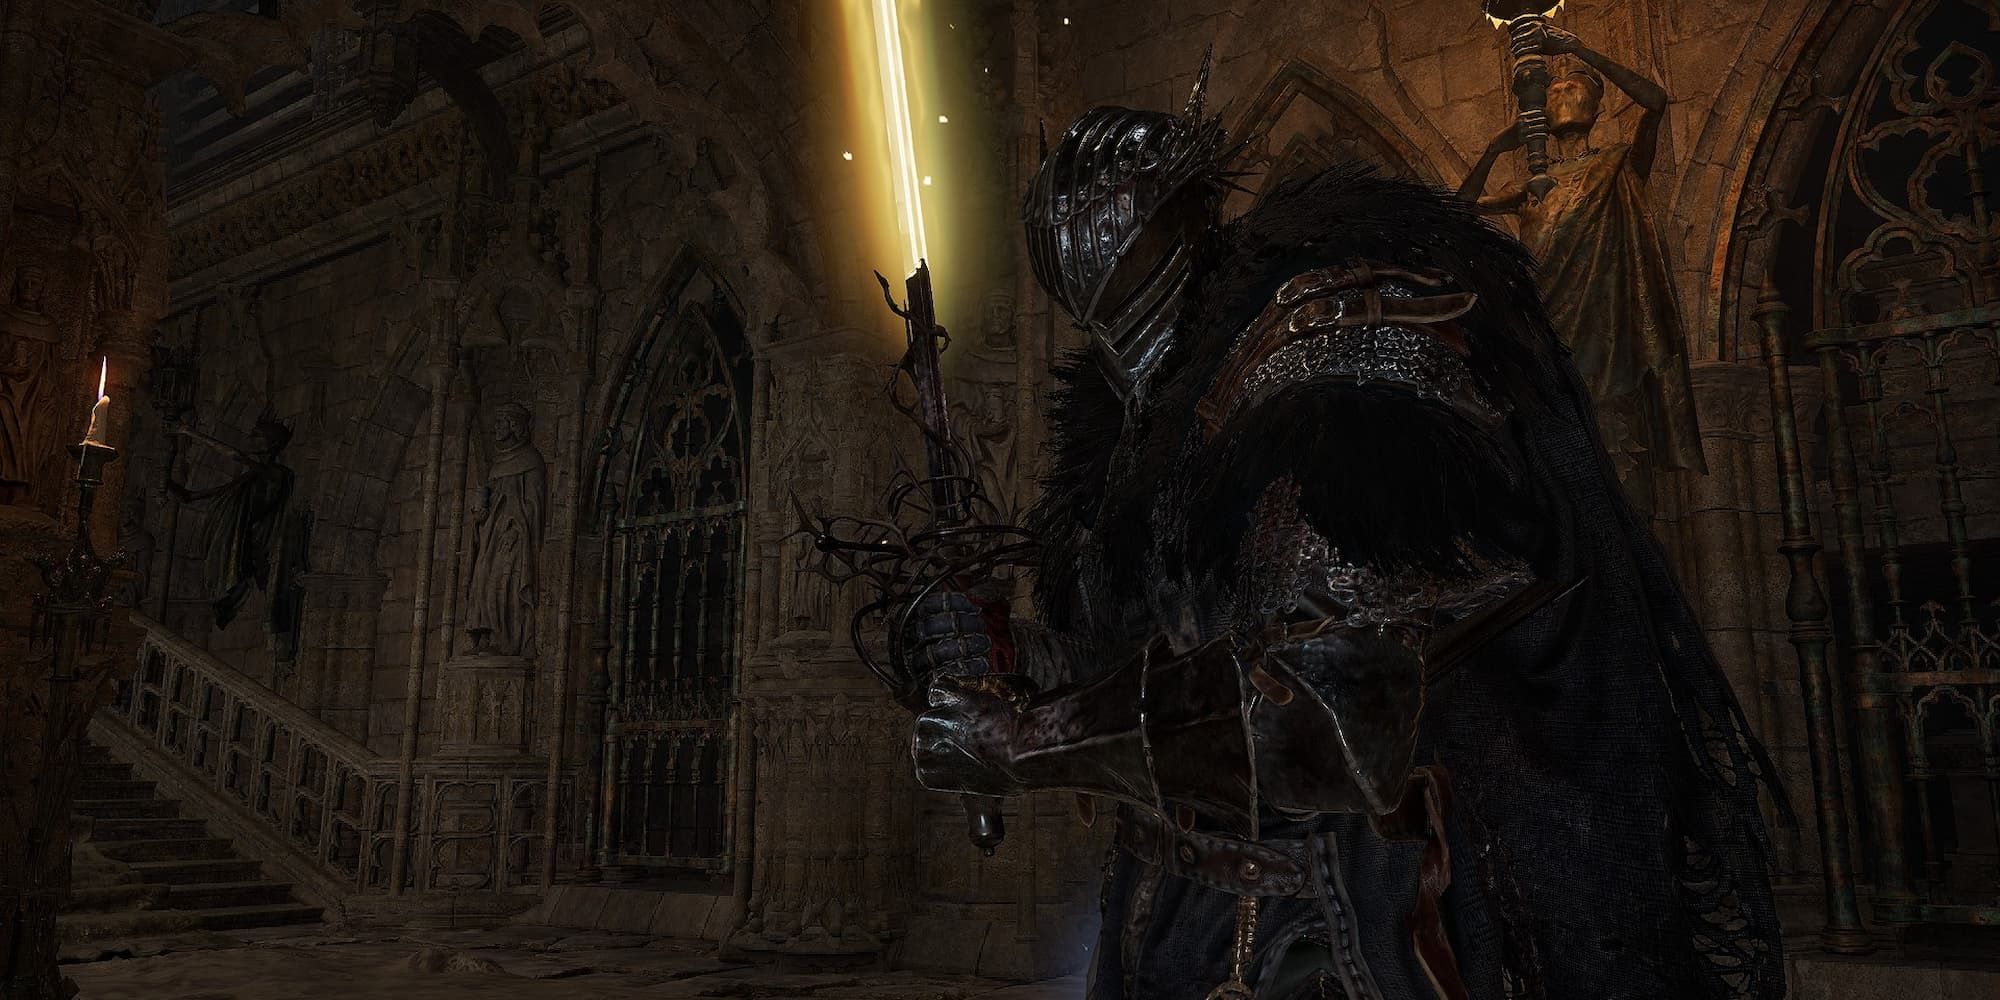 Pieta's Sword, a boss weapon from Lords of the Fallen